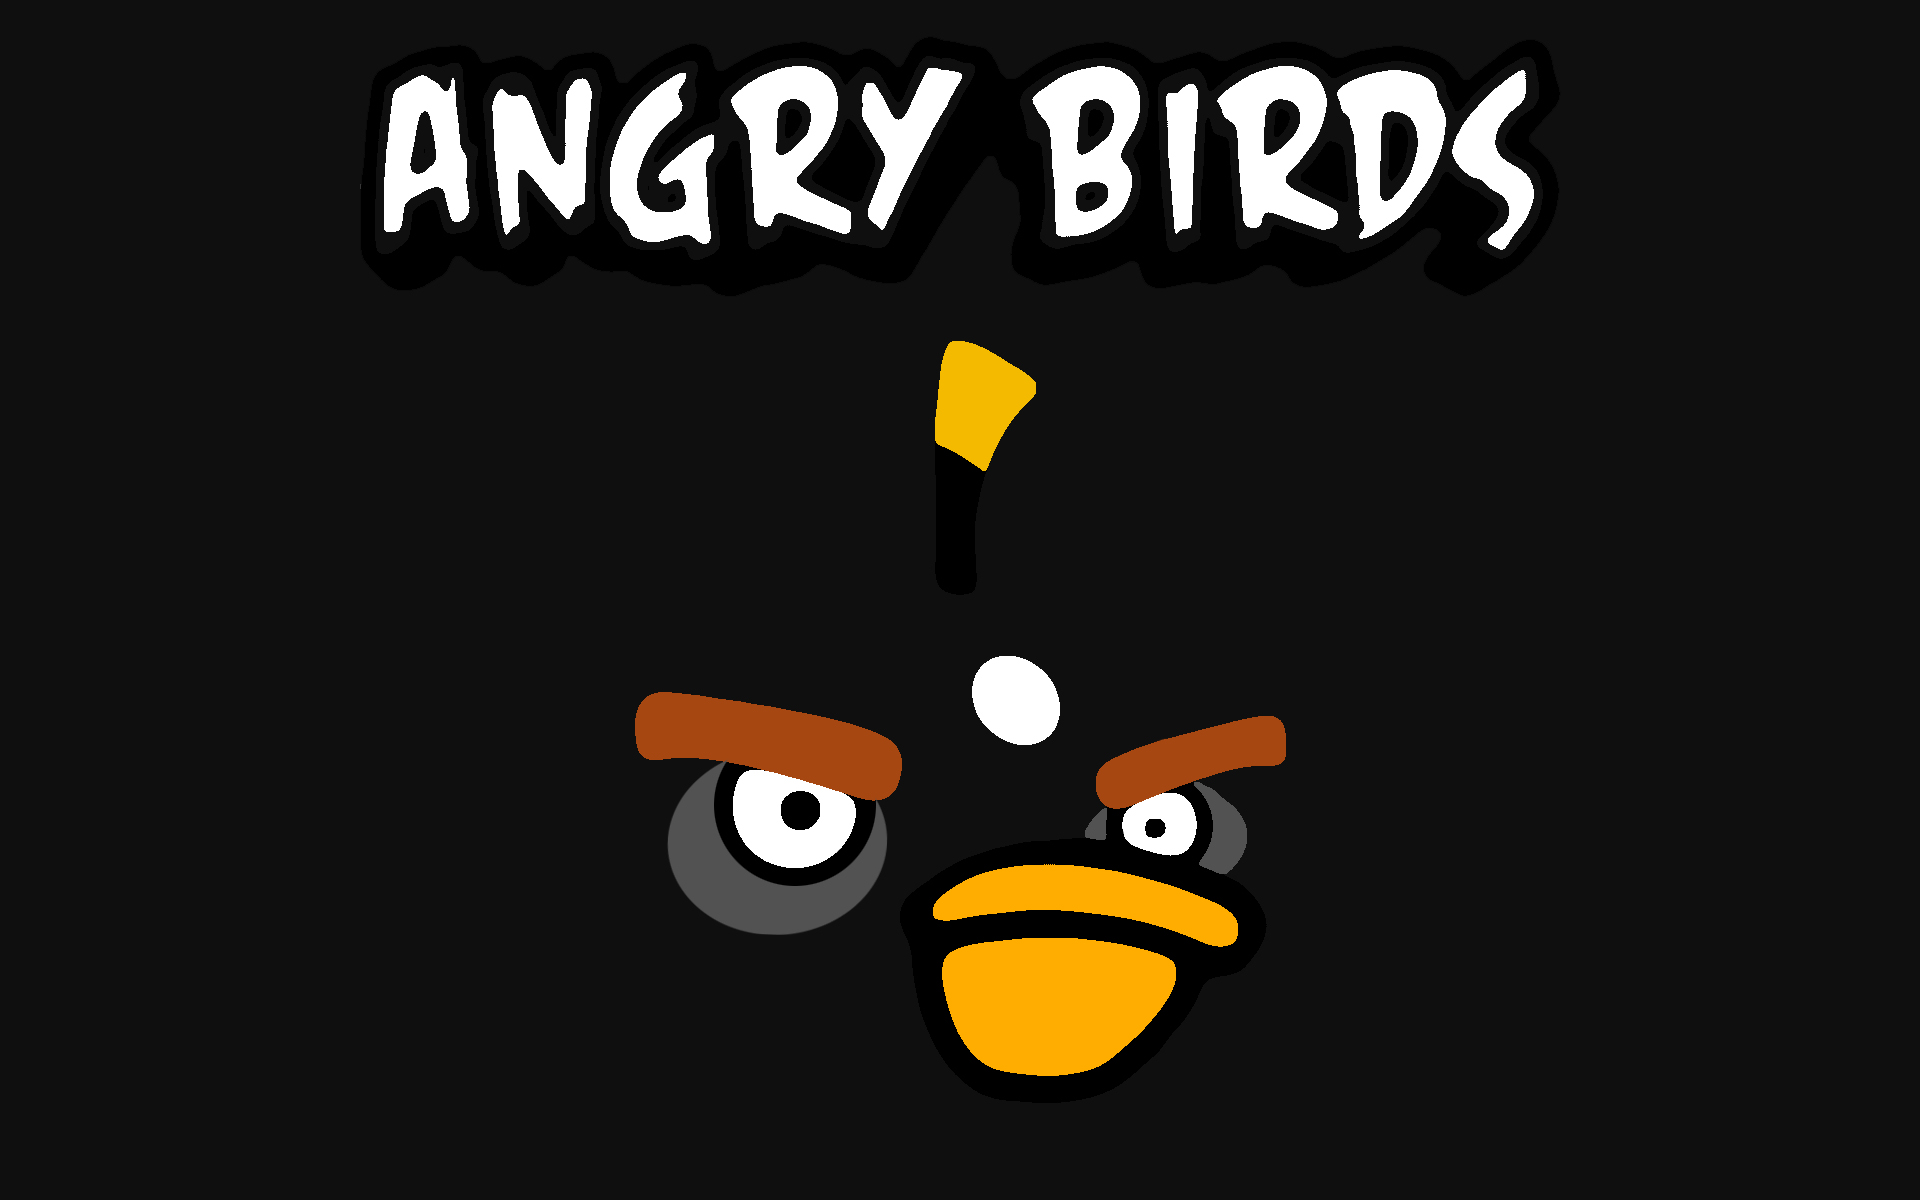 video game, angry birds